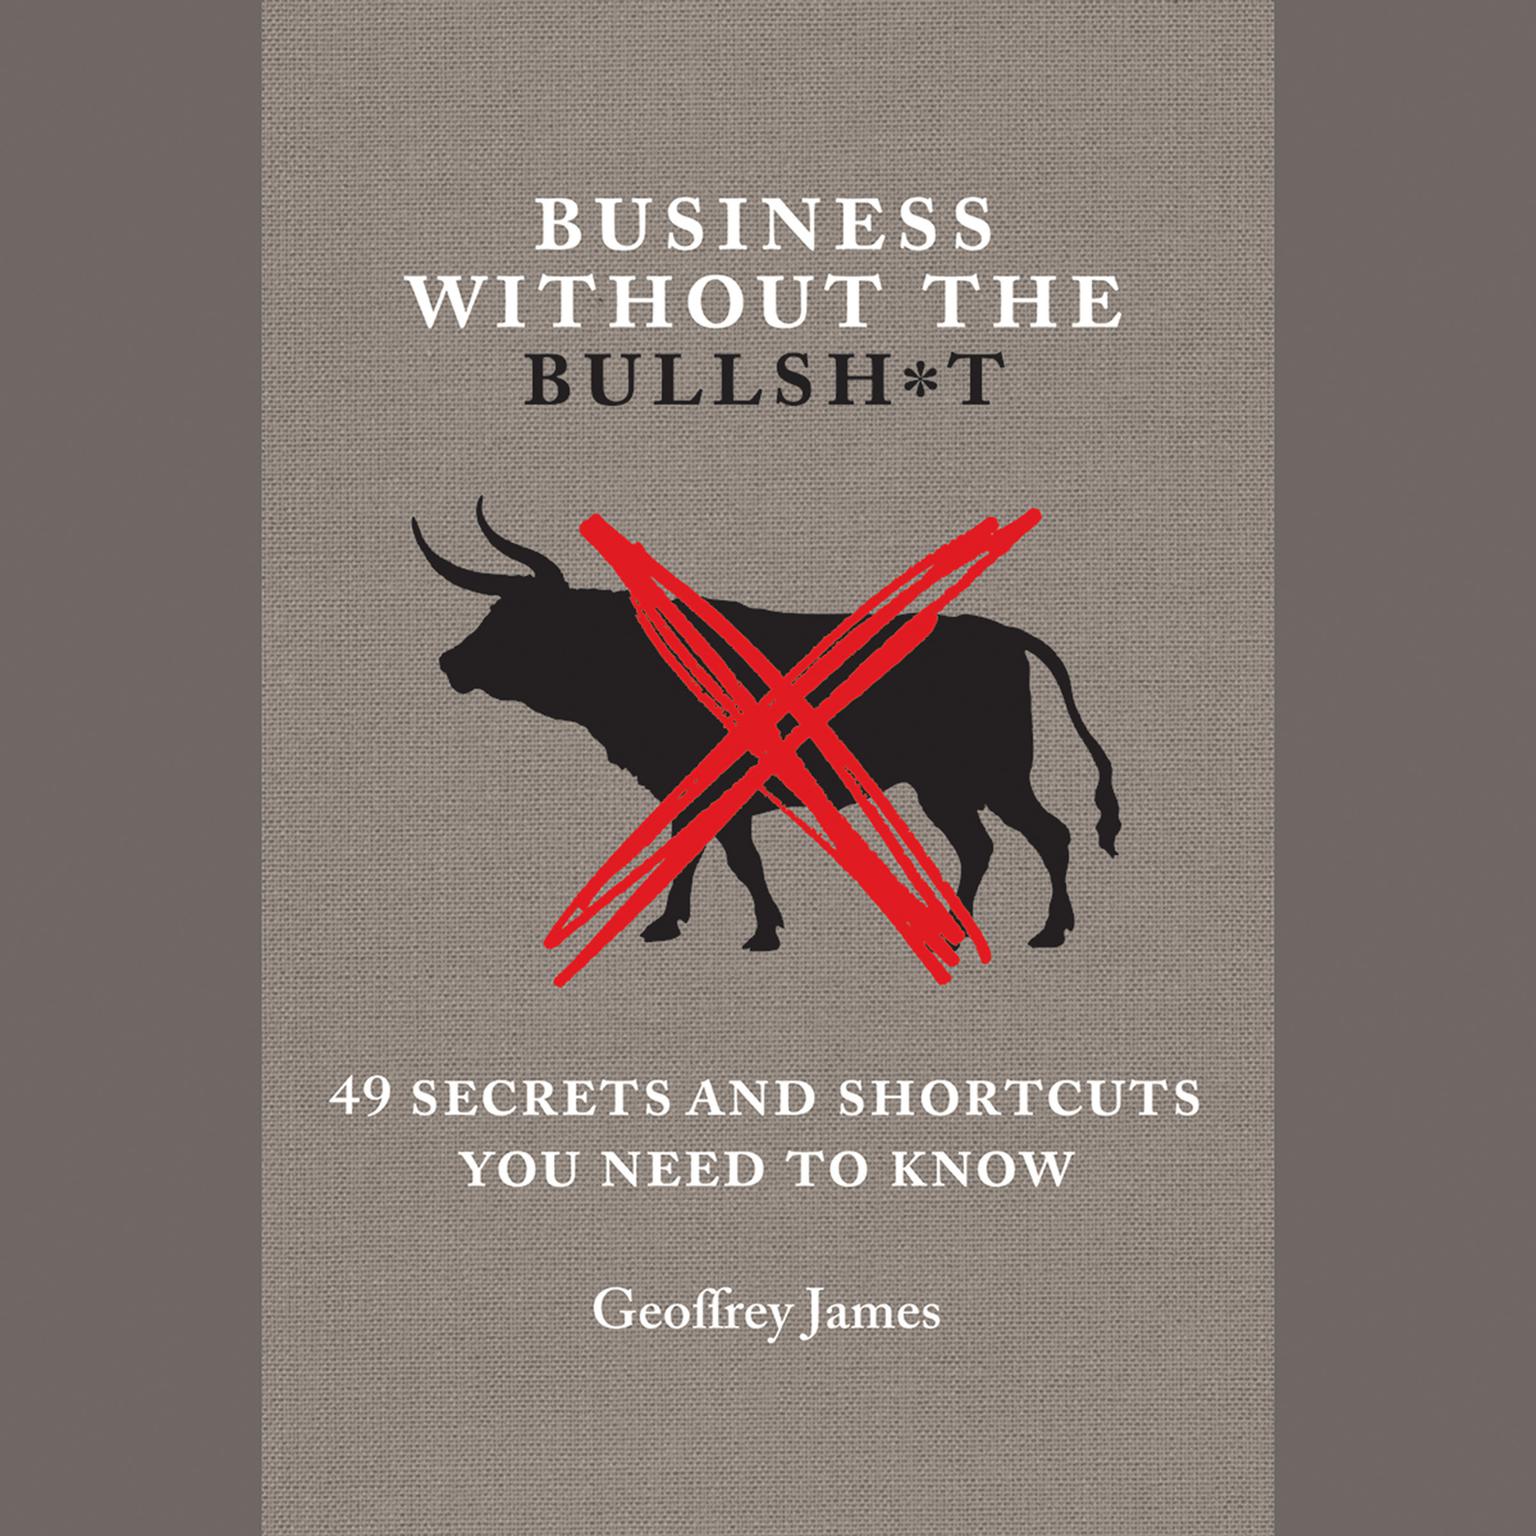 Business Without the Bullsh*t: 49 Secrets and Shortcuts You Need to Know Audiobook, by Geoffrey James